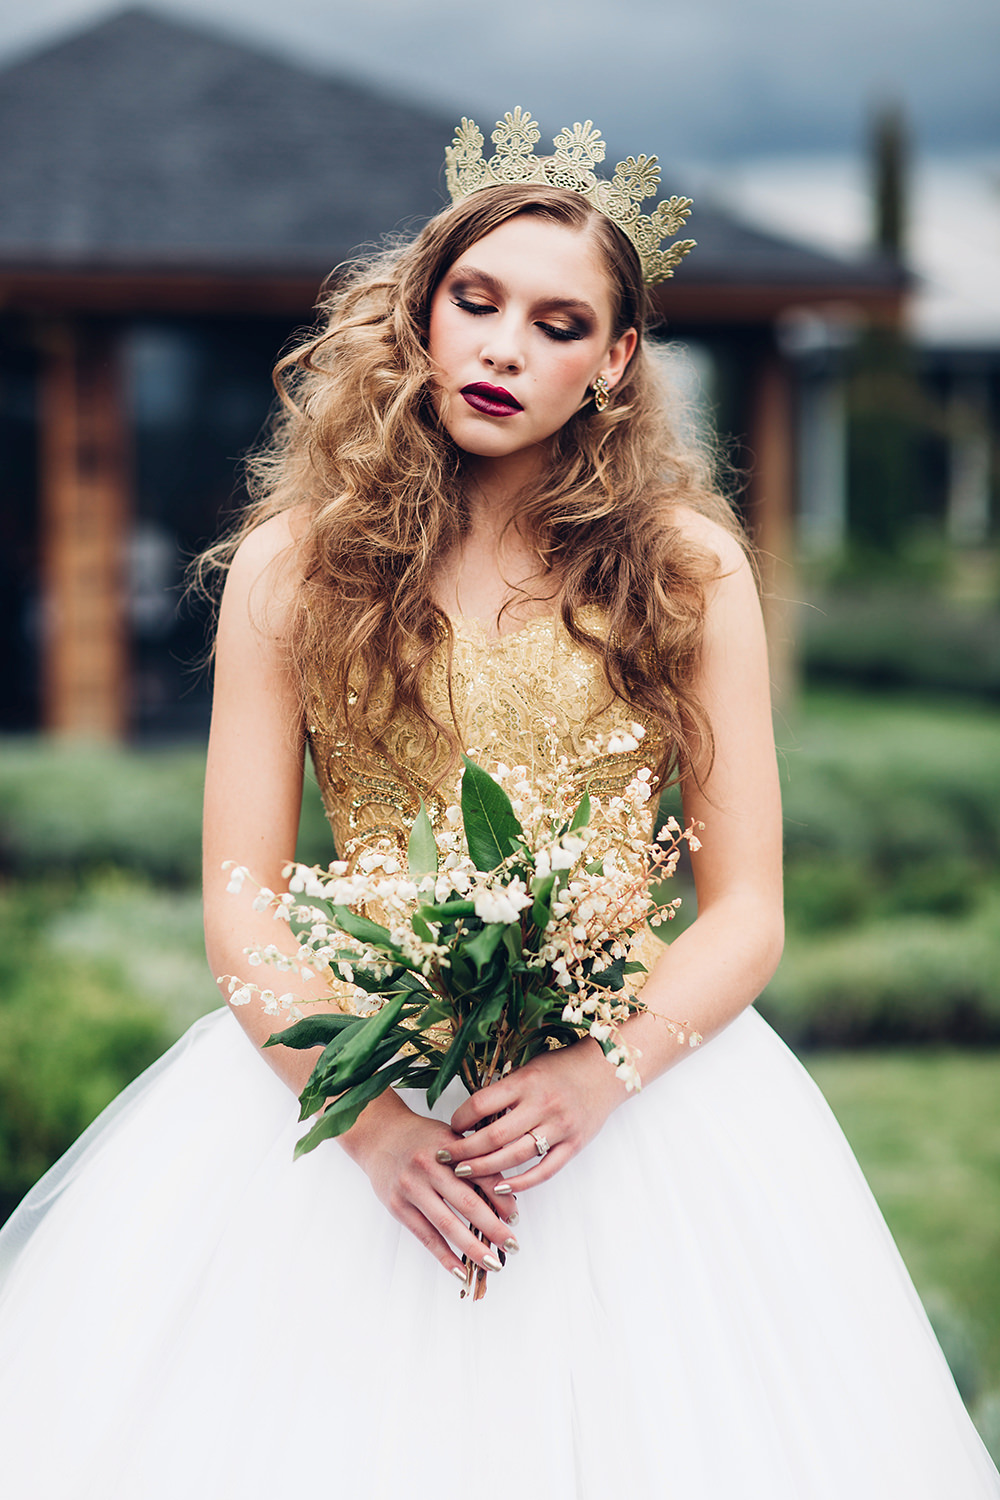 The gold bodice of this dress looked stunning with a crown